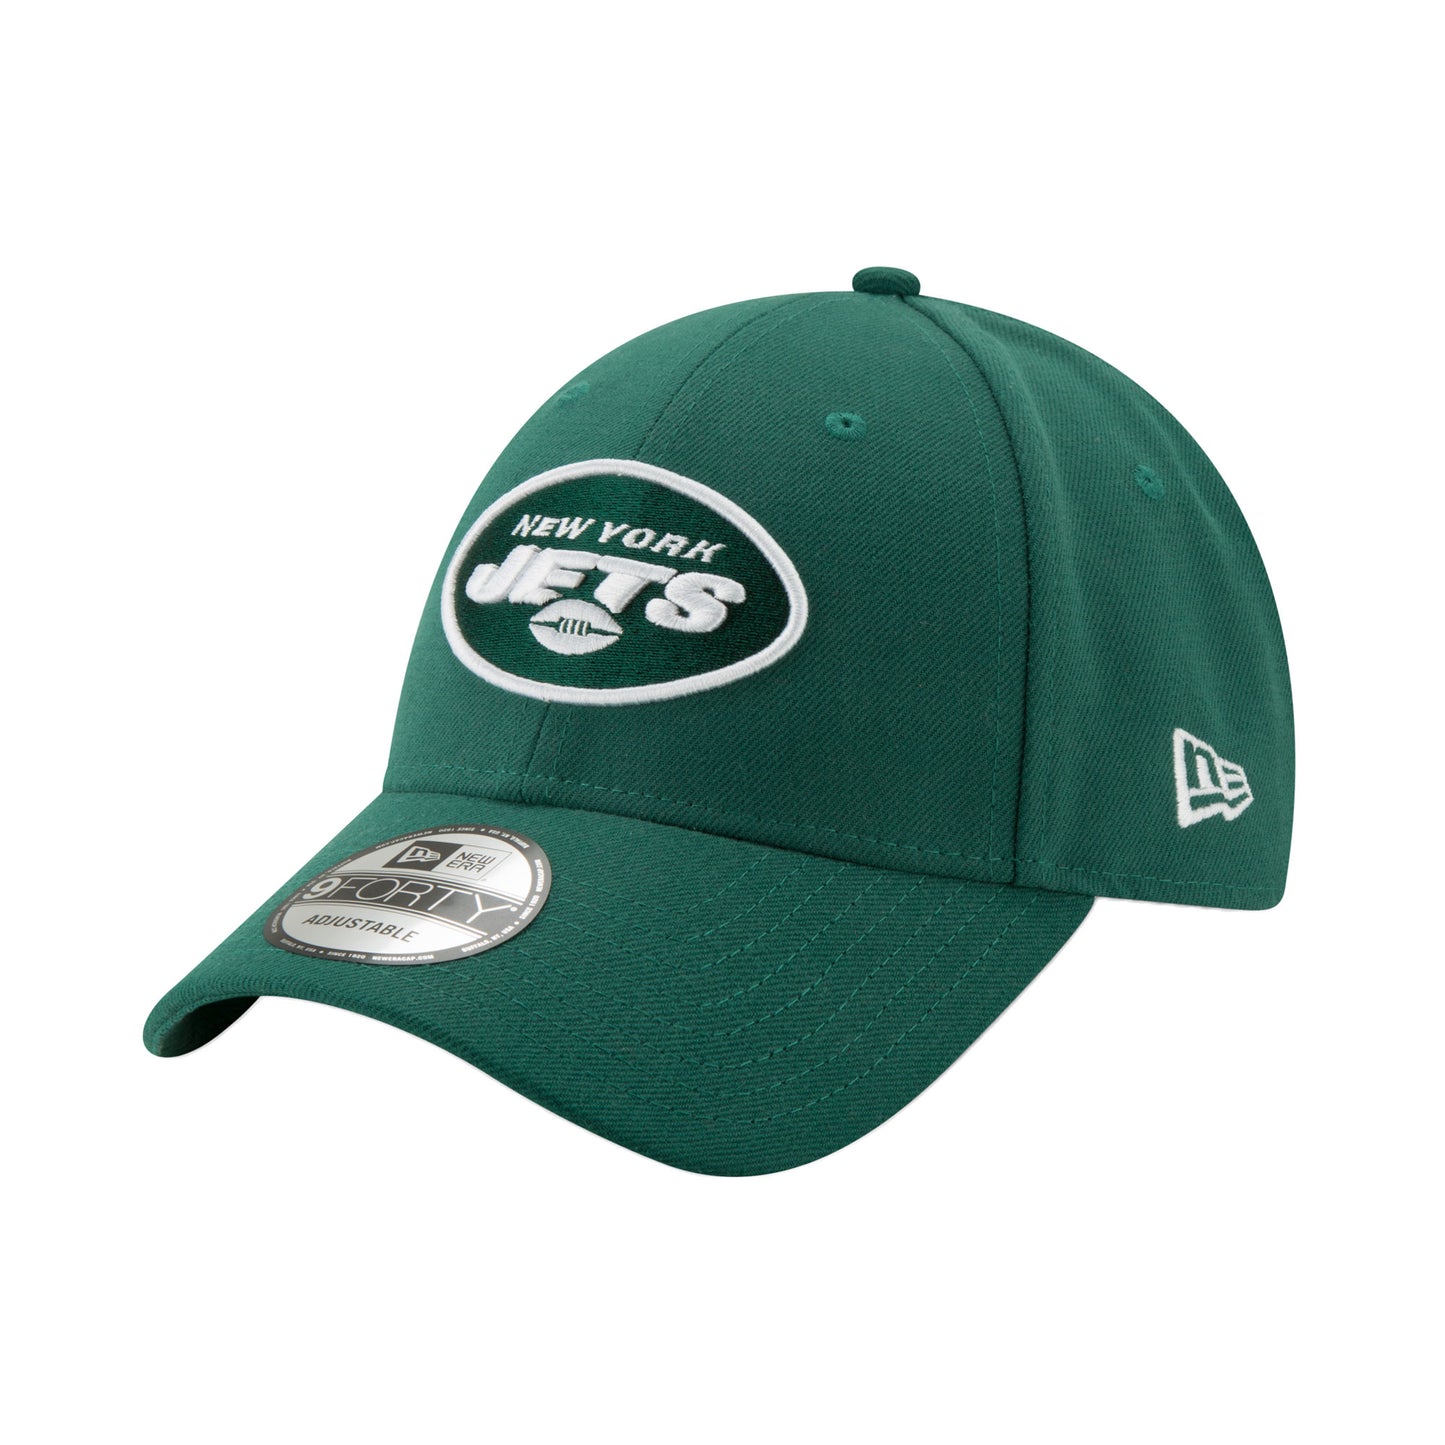 THE LEAGUE New York Jets 9FORTY New Era Cap